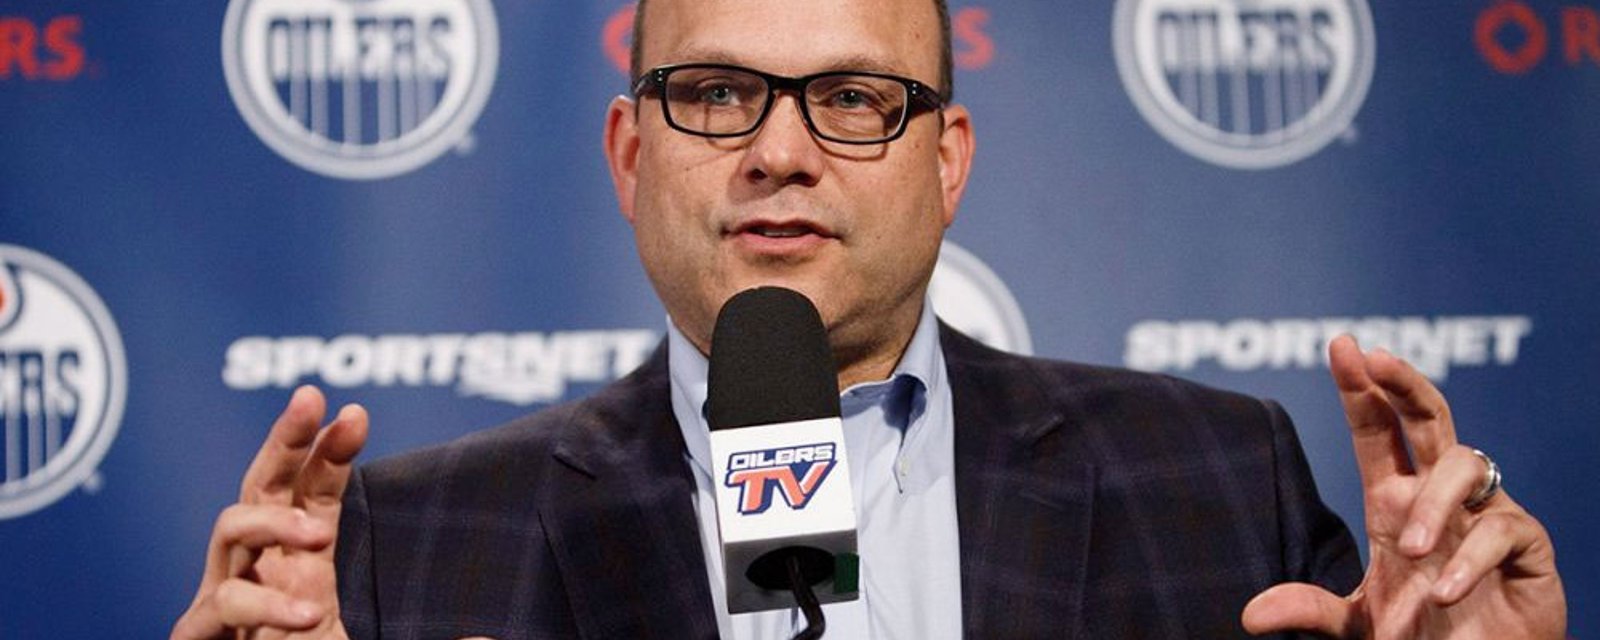 Peter Chiarelli is back in the NHL!